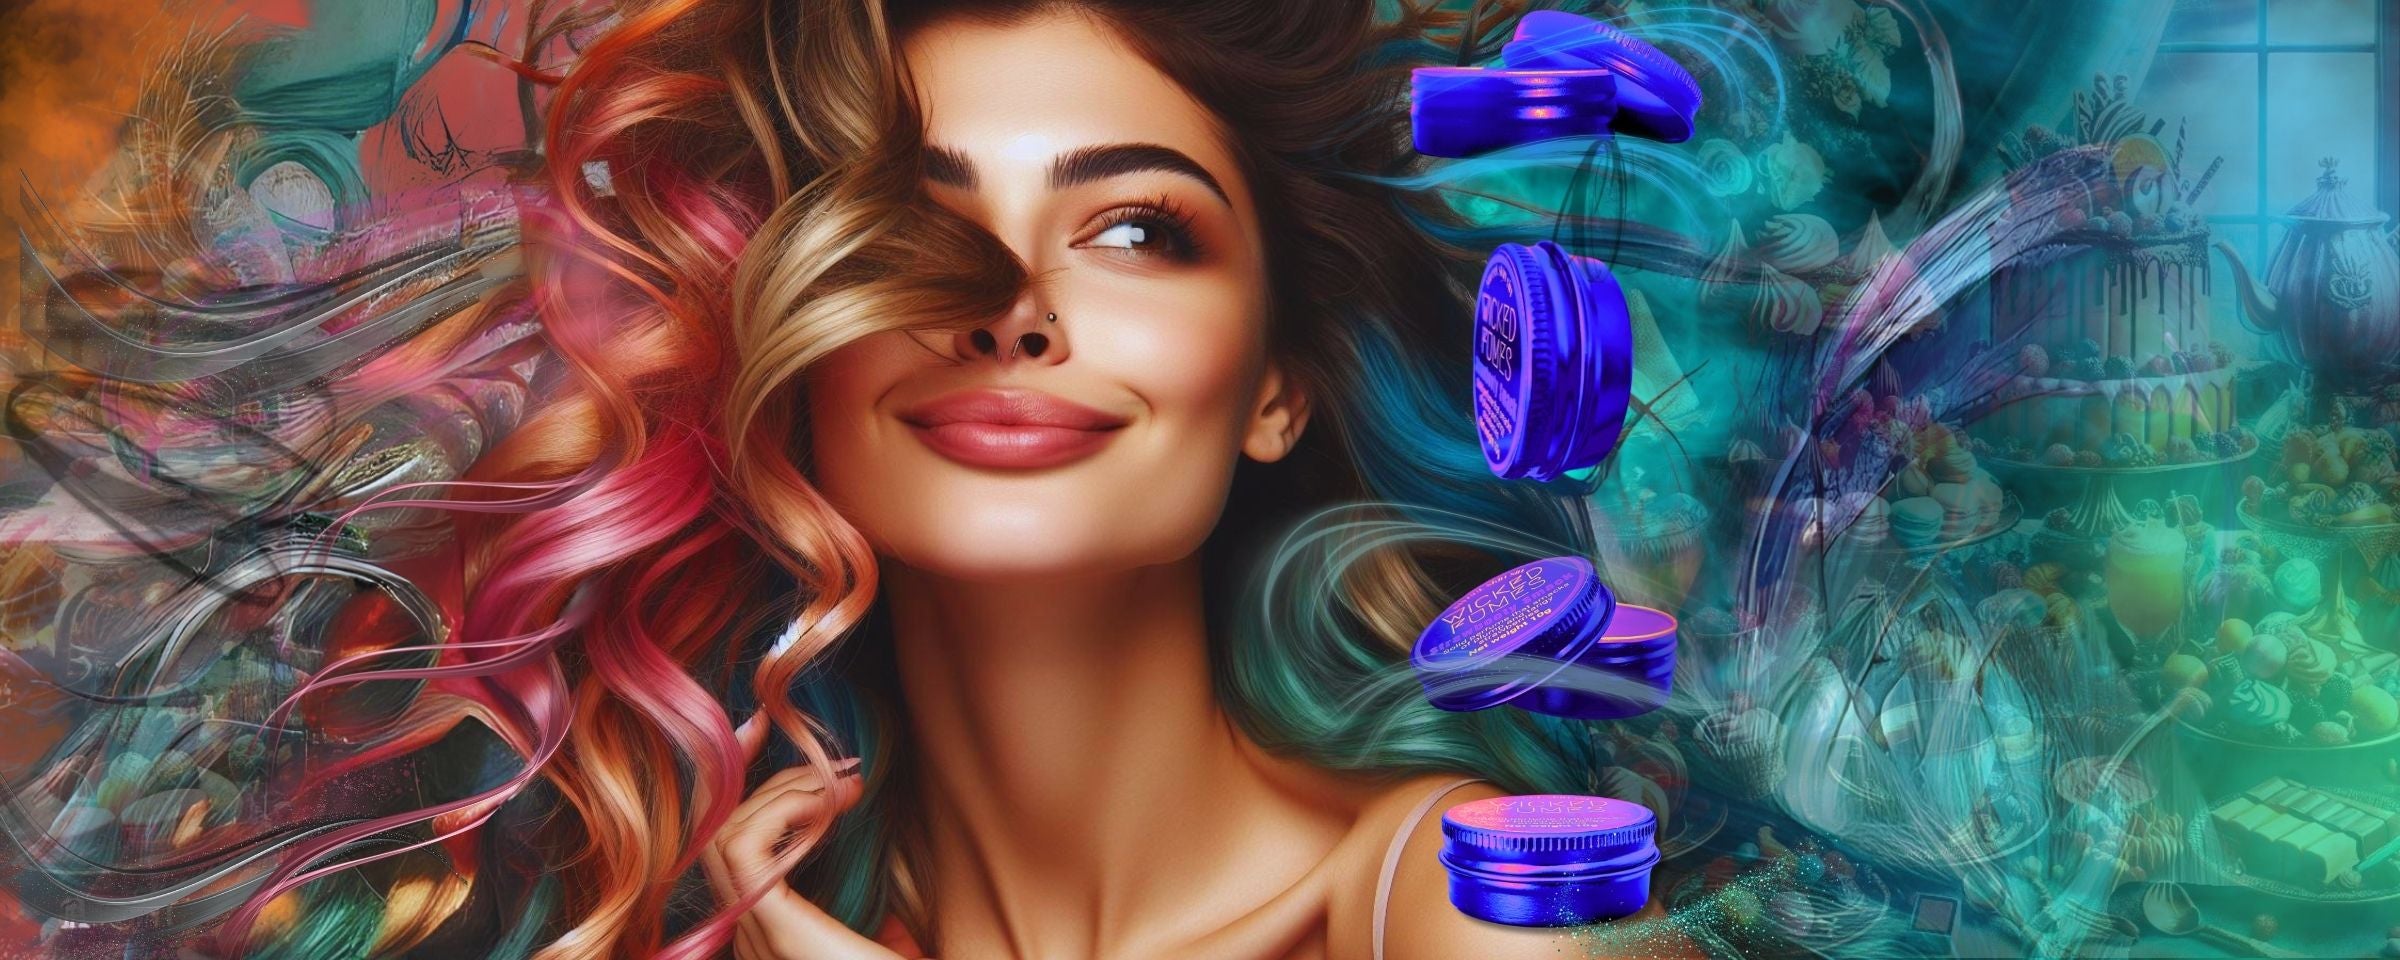 Woman with colourful hair smiling at collection of solid perfumes against background of swirling smoke and desserts and treats